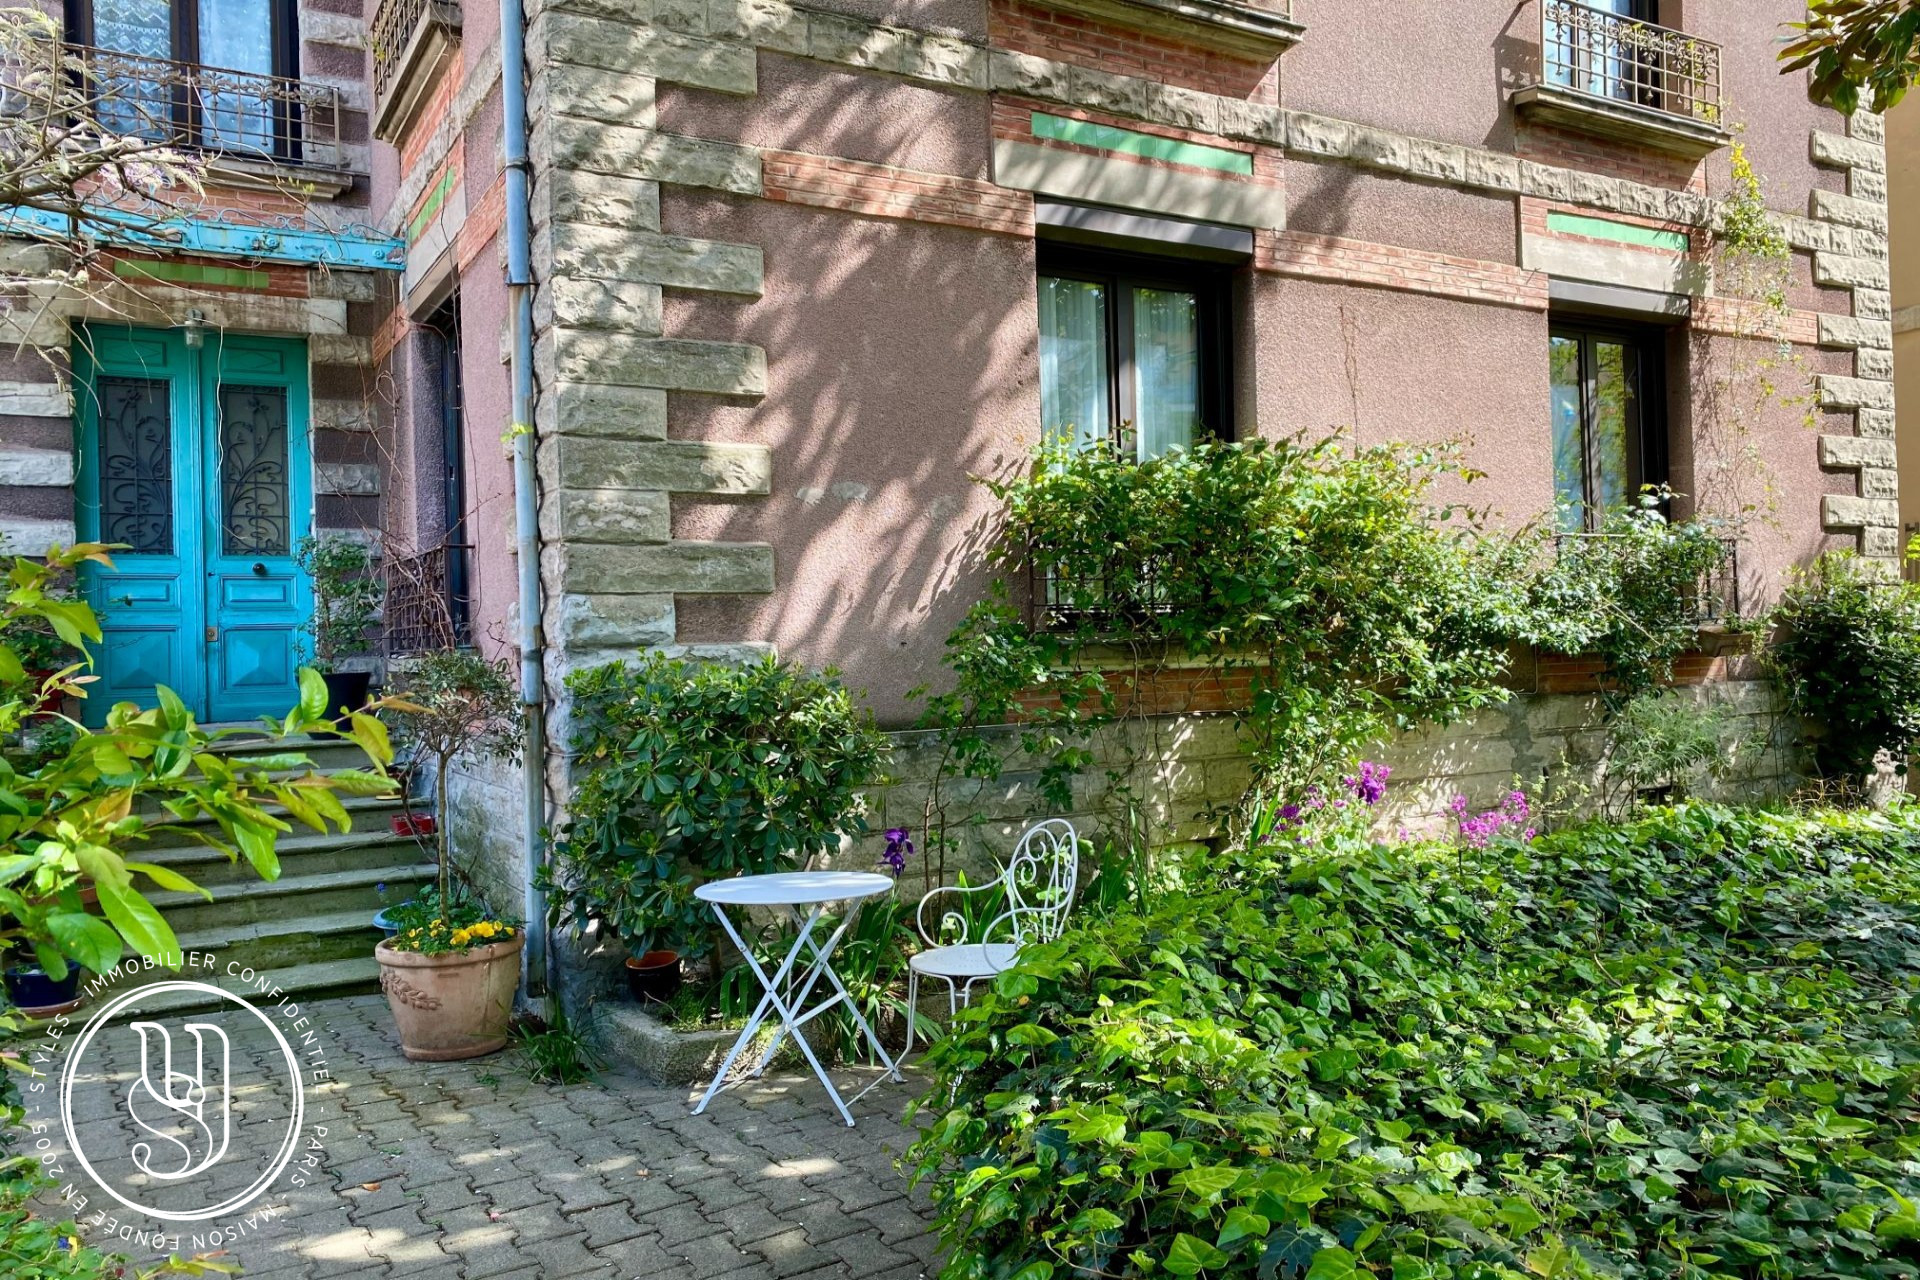 Toulouse - Under offer - A charming bourgeois house with garden and garag - image 7